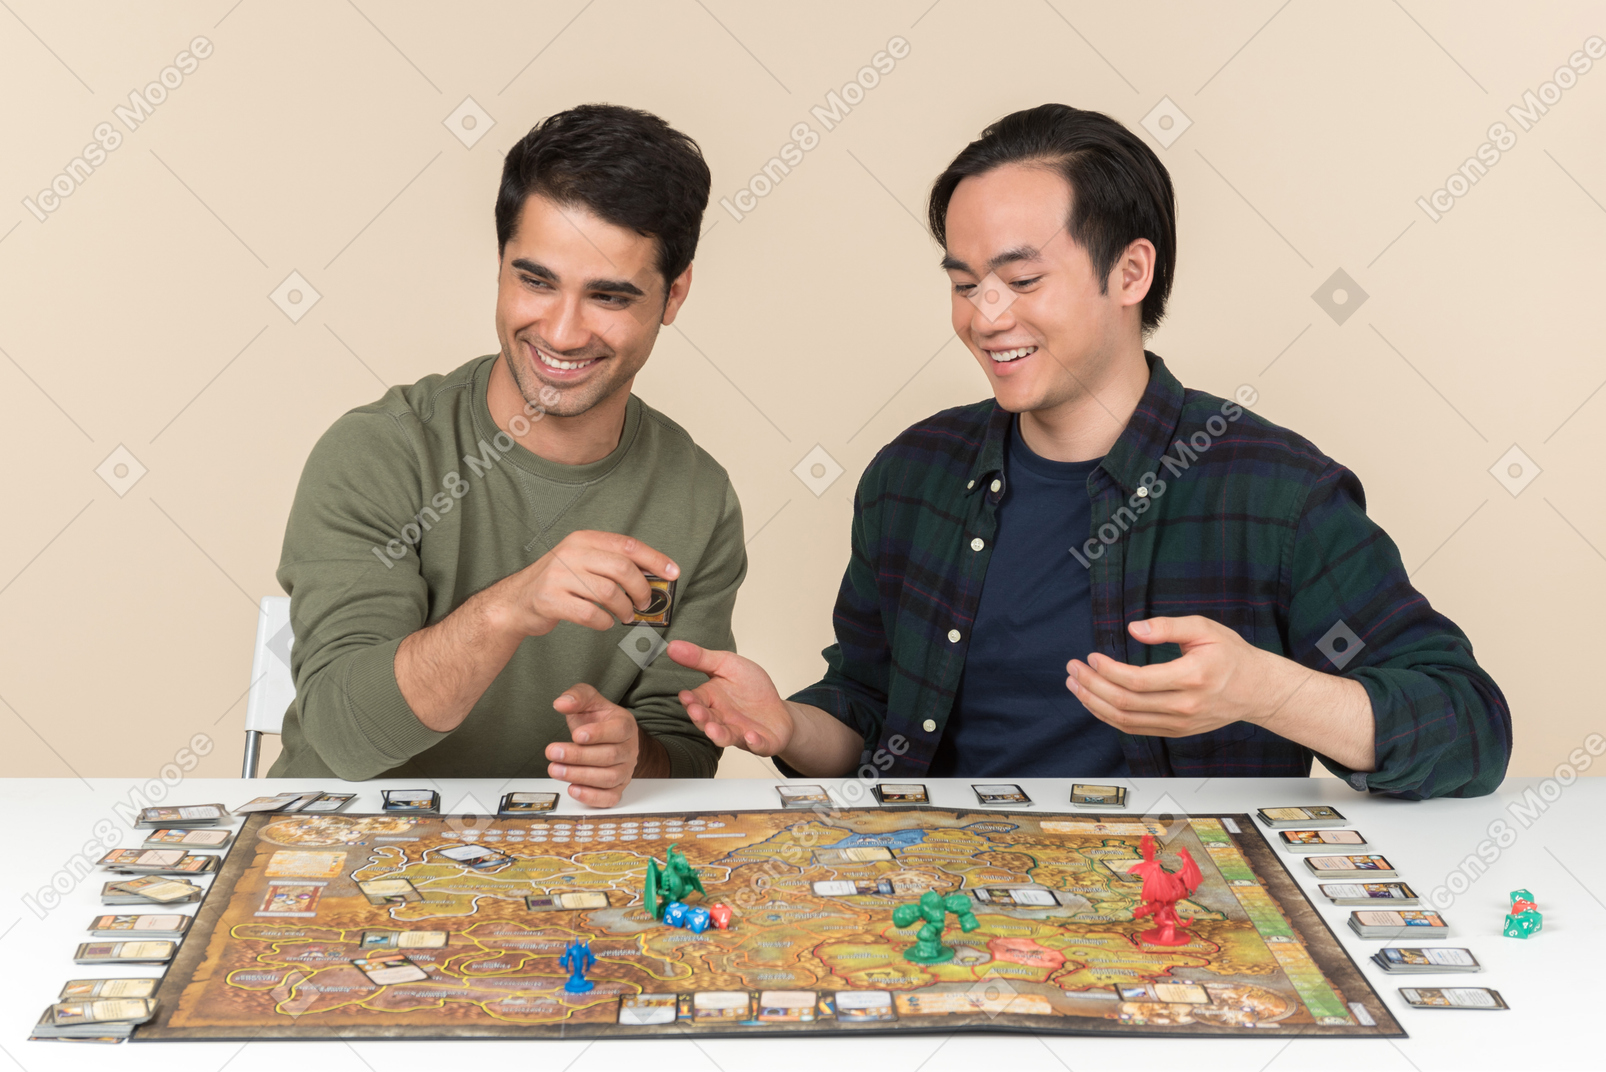 Laughing interracial friends sitting at the table and playing board game